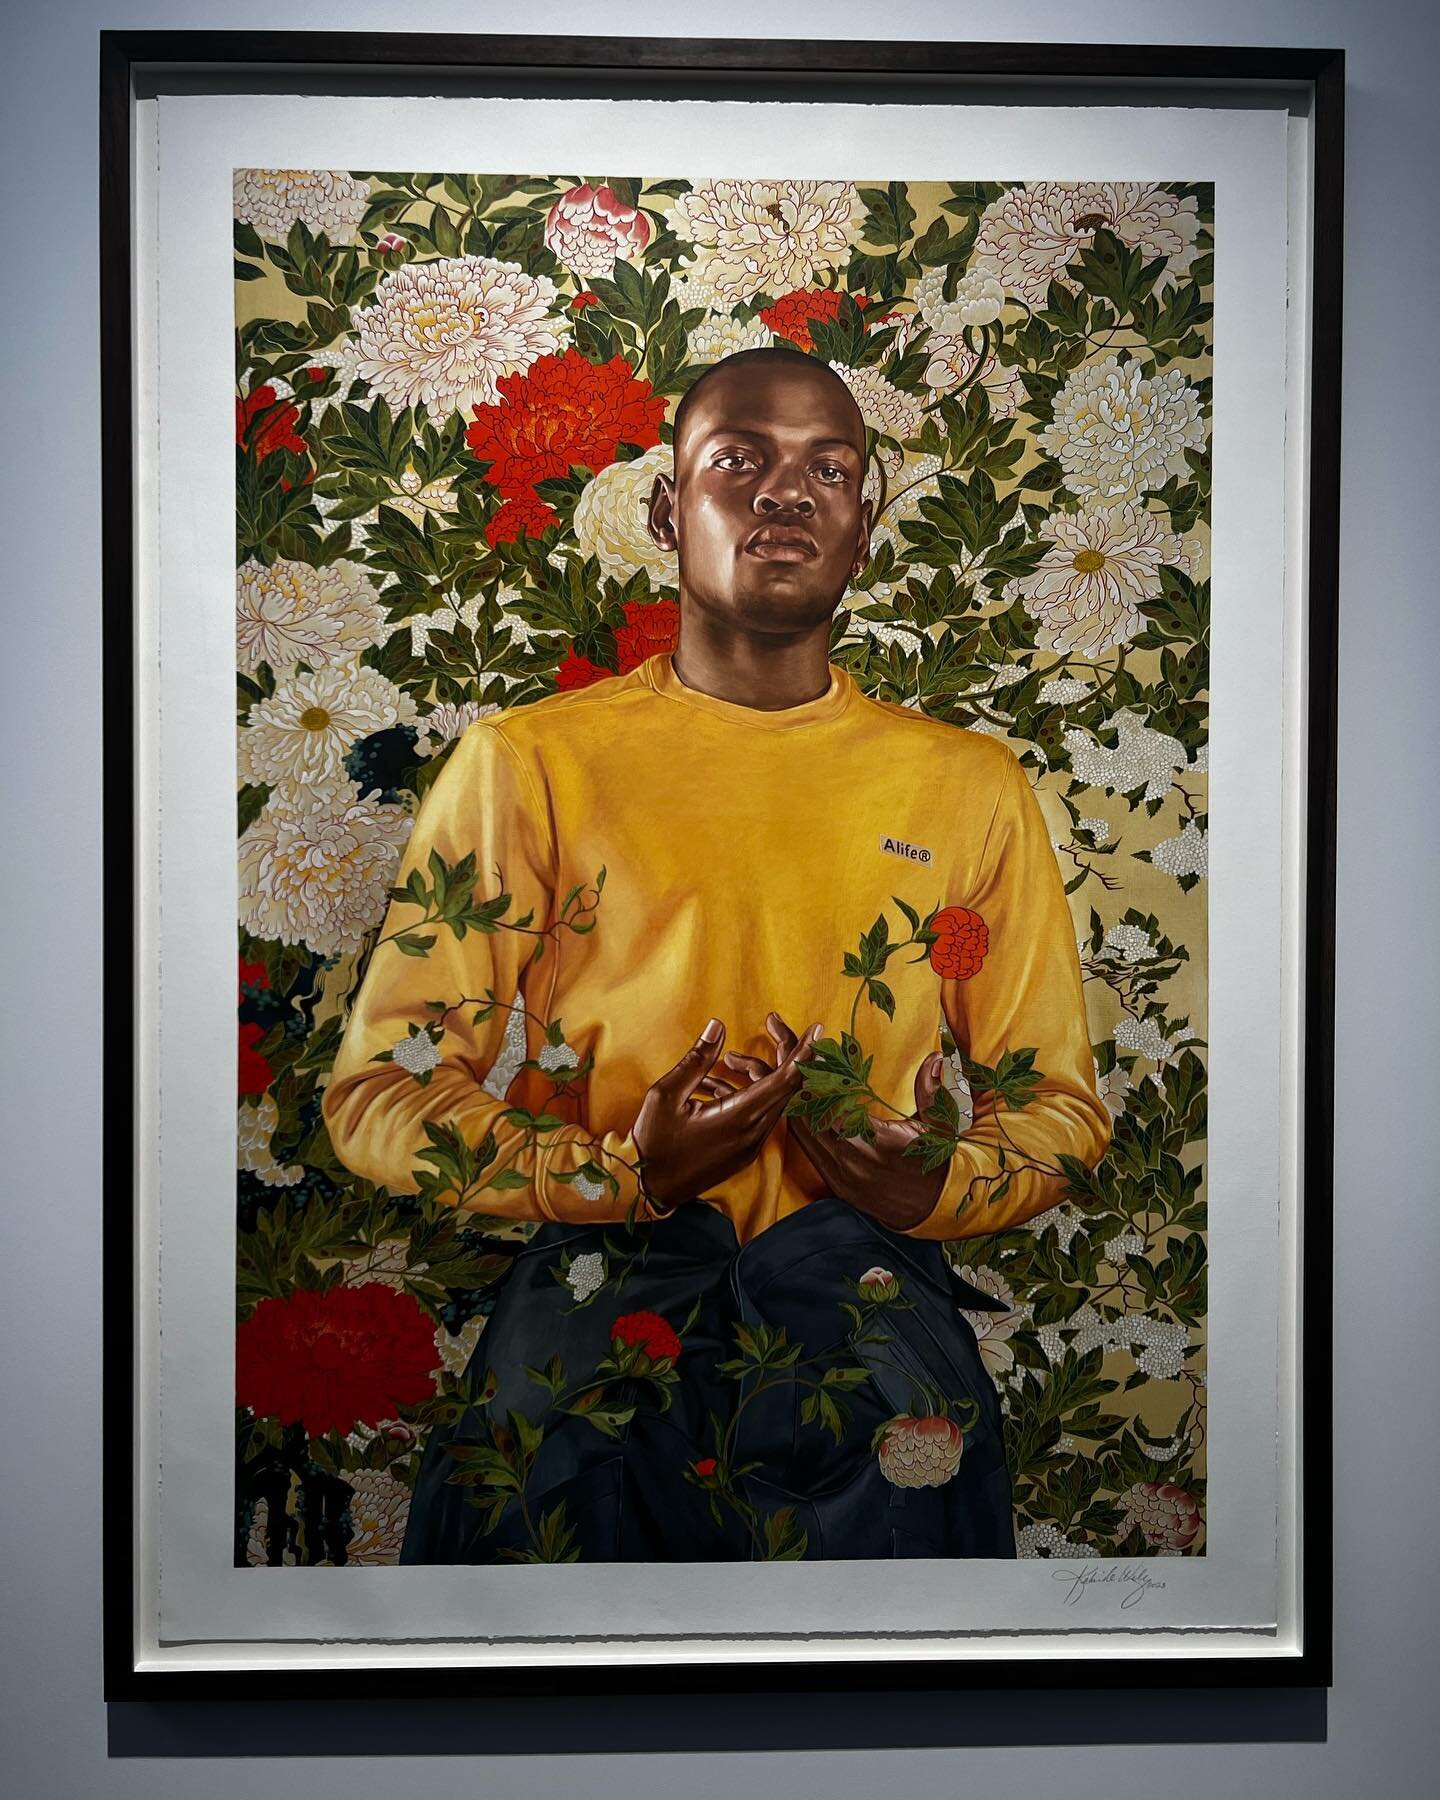 Honored to have my face be apart of @kehindewiley exhibition &ldquo;Colorful Realm&rdquo; at @robertsprojects in LA. These paintings and a few others will be up from Jan 21st - April 8th 

#kehindewiley #artwork #actor #actorslife #model #robertproje